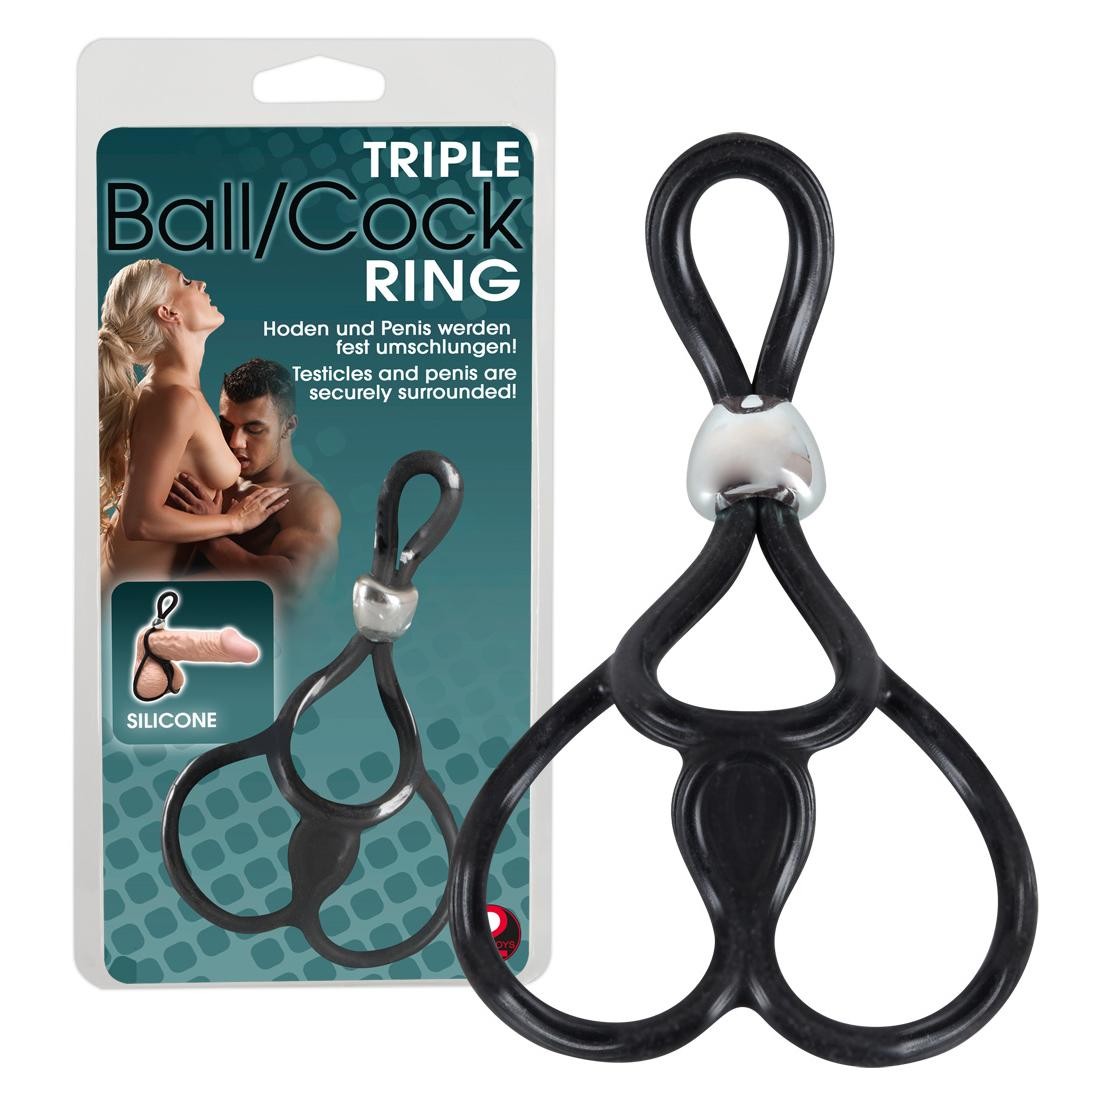  You2Toys  -  Triple  Ball-  und  Cockring  -  Penis-  und  Hodenring 